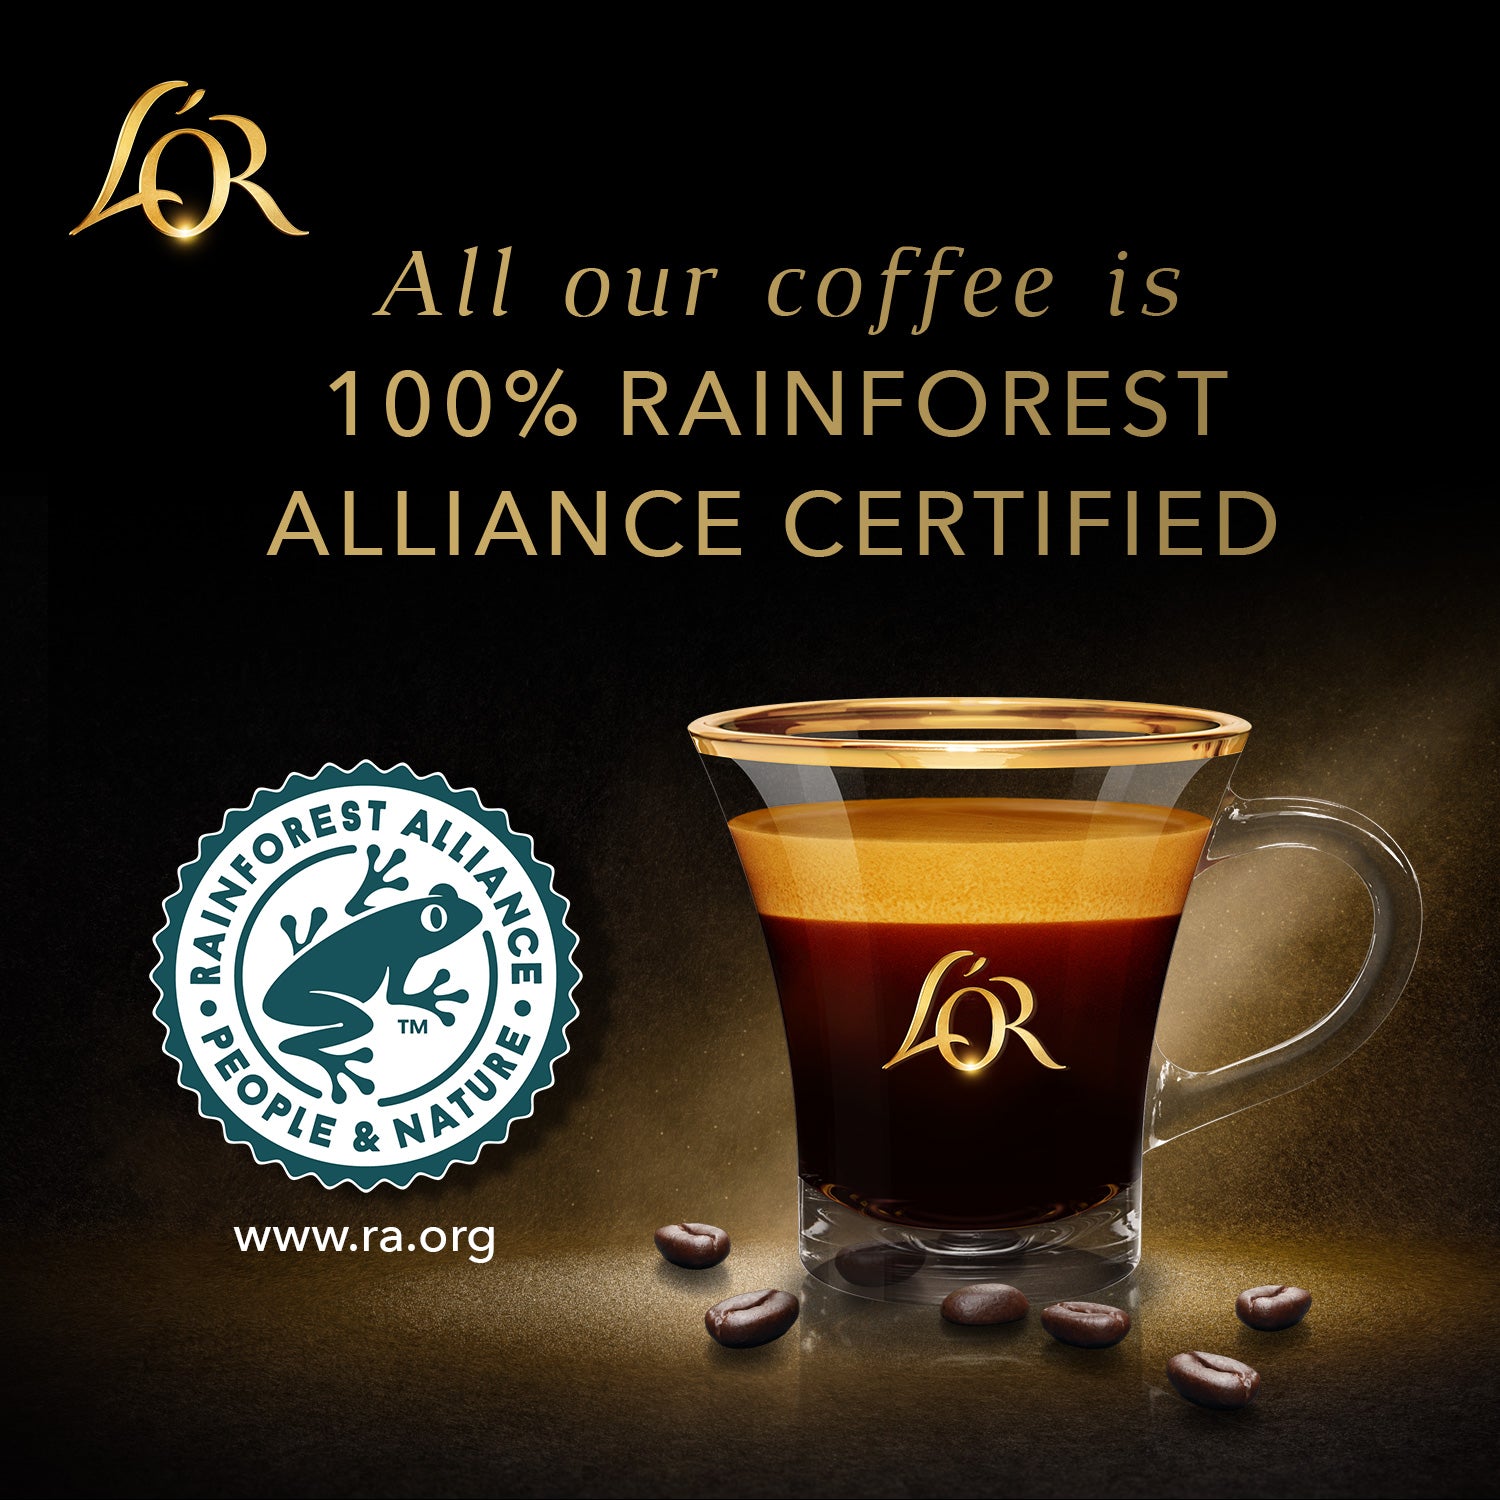 L'OR coffee is 100% Rainforest Alliance certified.